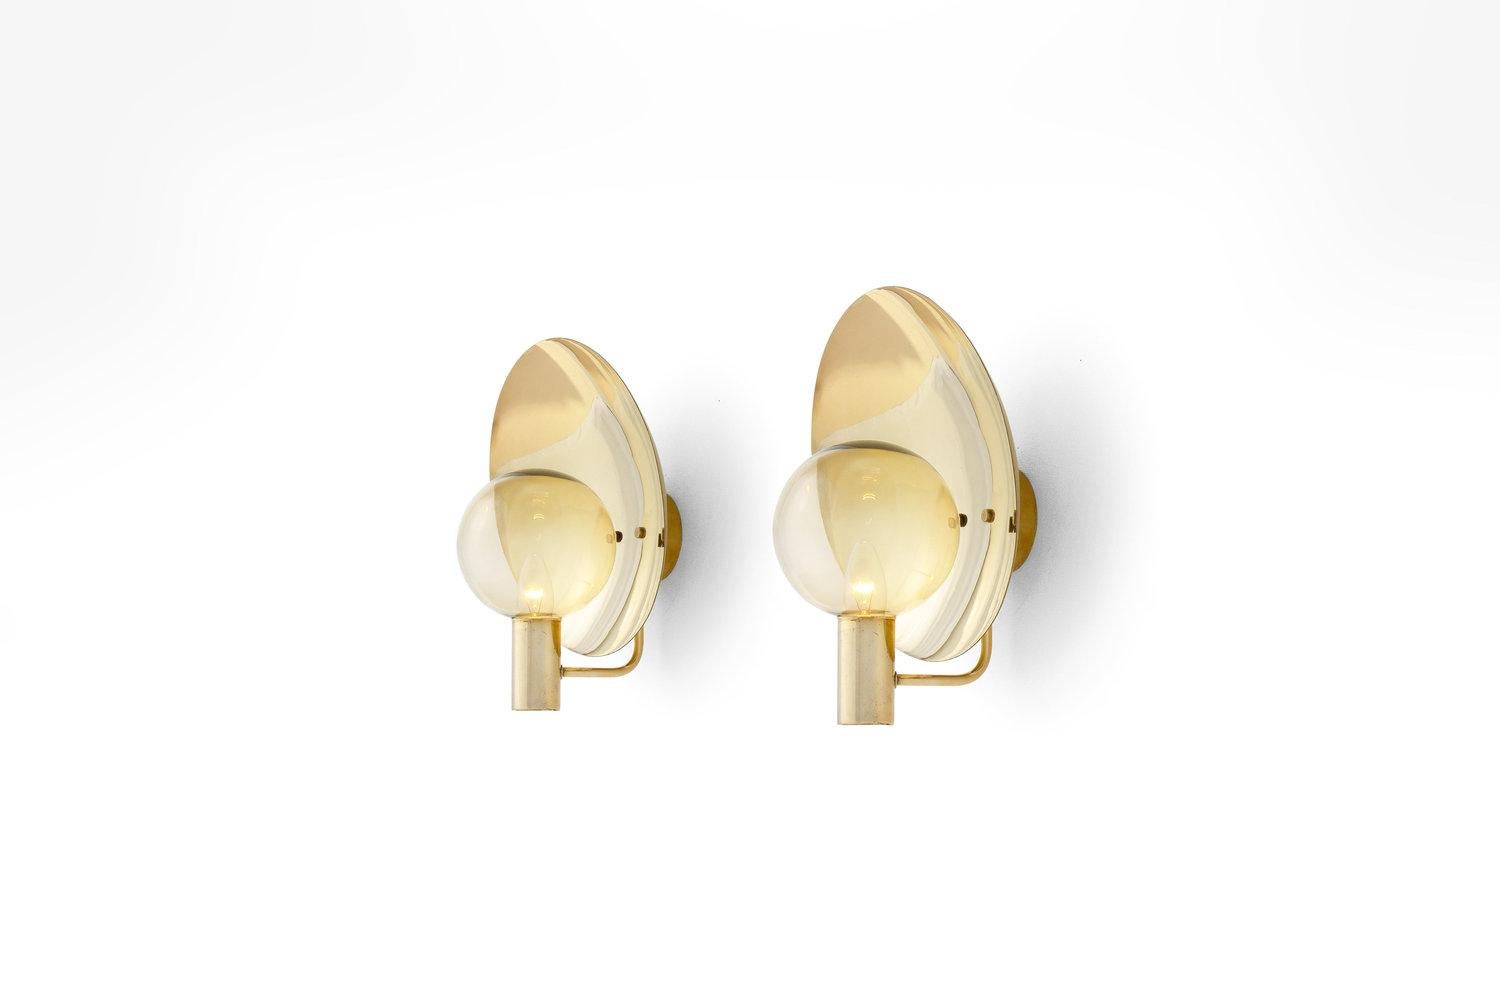 Pair of V180 Hans Agne Jakobsson Wall Lamps with smoked glass shades, Sweden 1960s. Produced by Hans Agne Jakobsson AB ca 1960s - 1970s.

This pleasing pair of brass wall lights have a minimalistic yet refined aesthetic. The light from the slightly